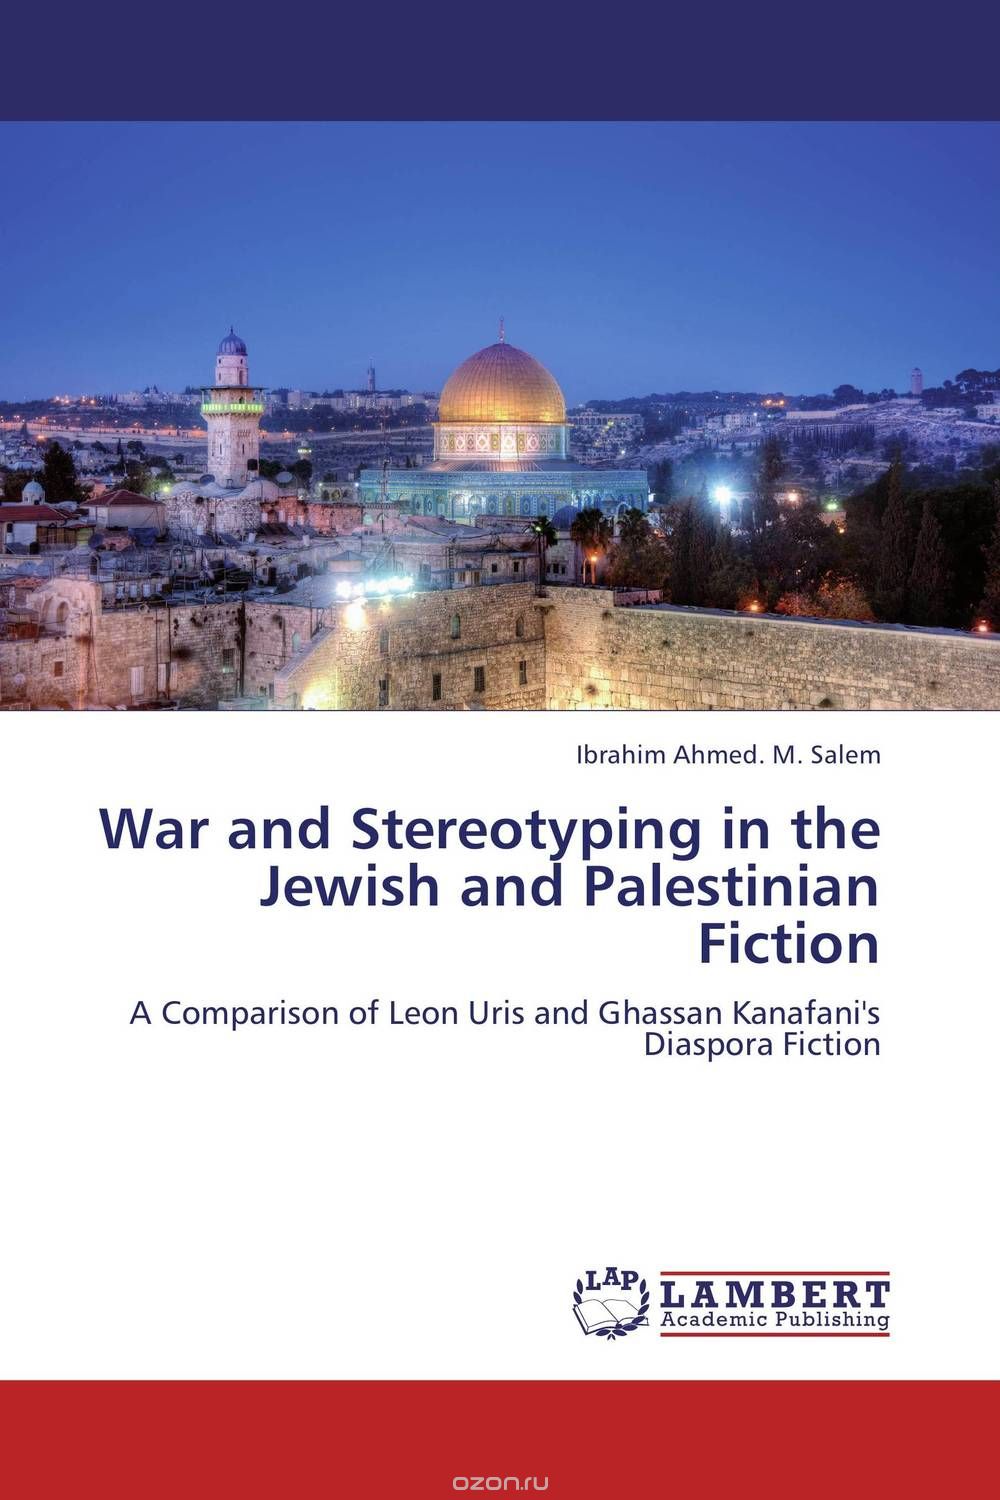 War and Stereotyping in the Jewish and Palestinian Fiction